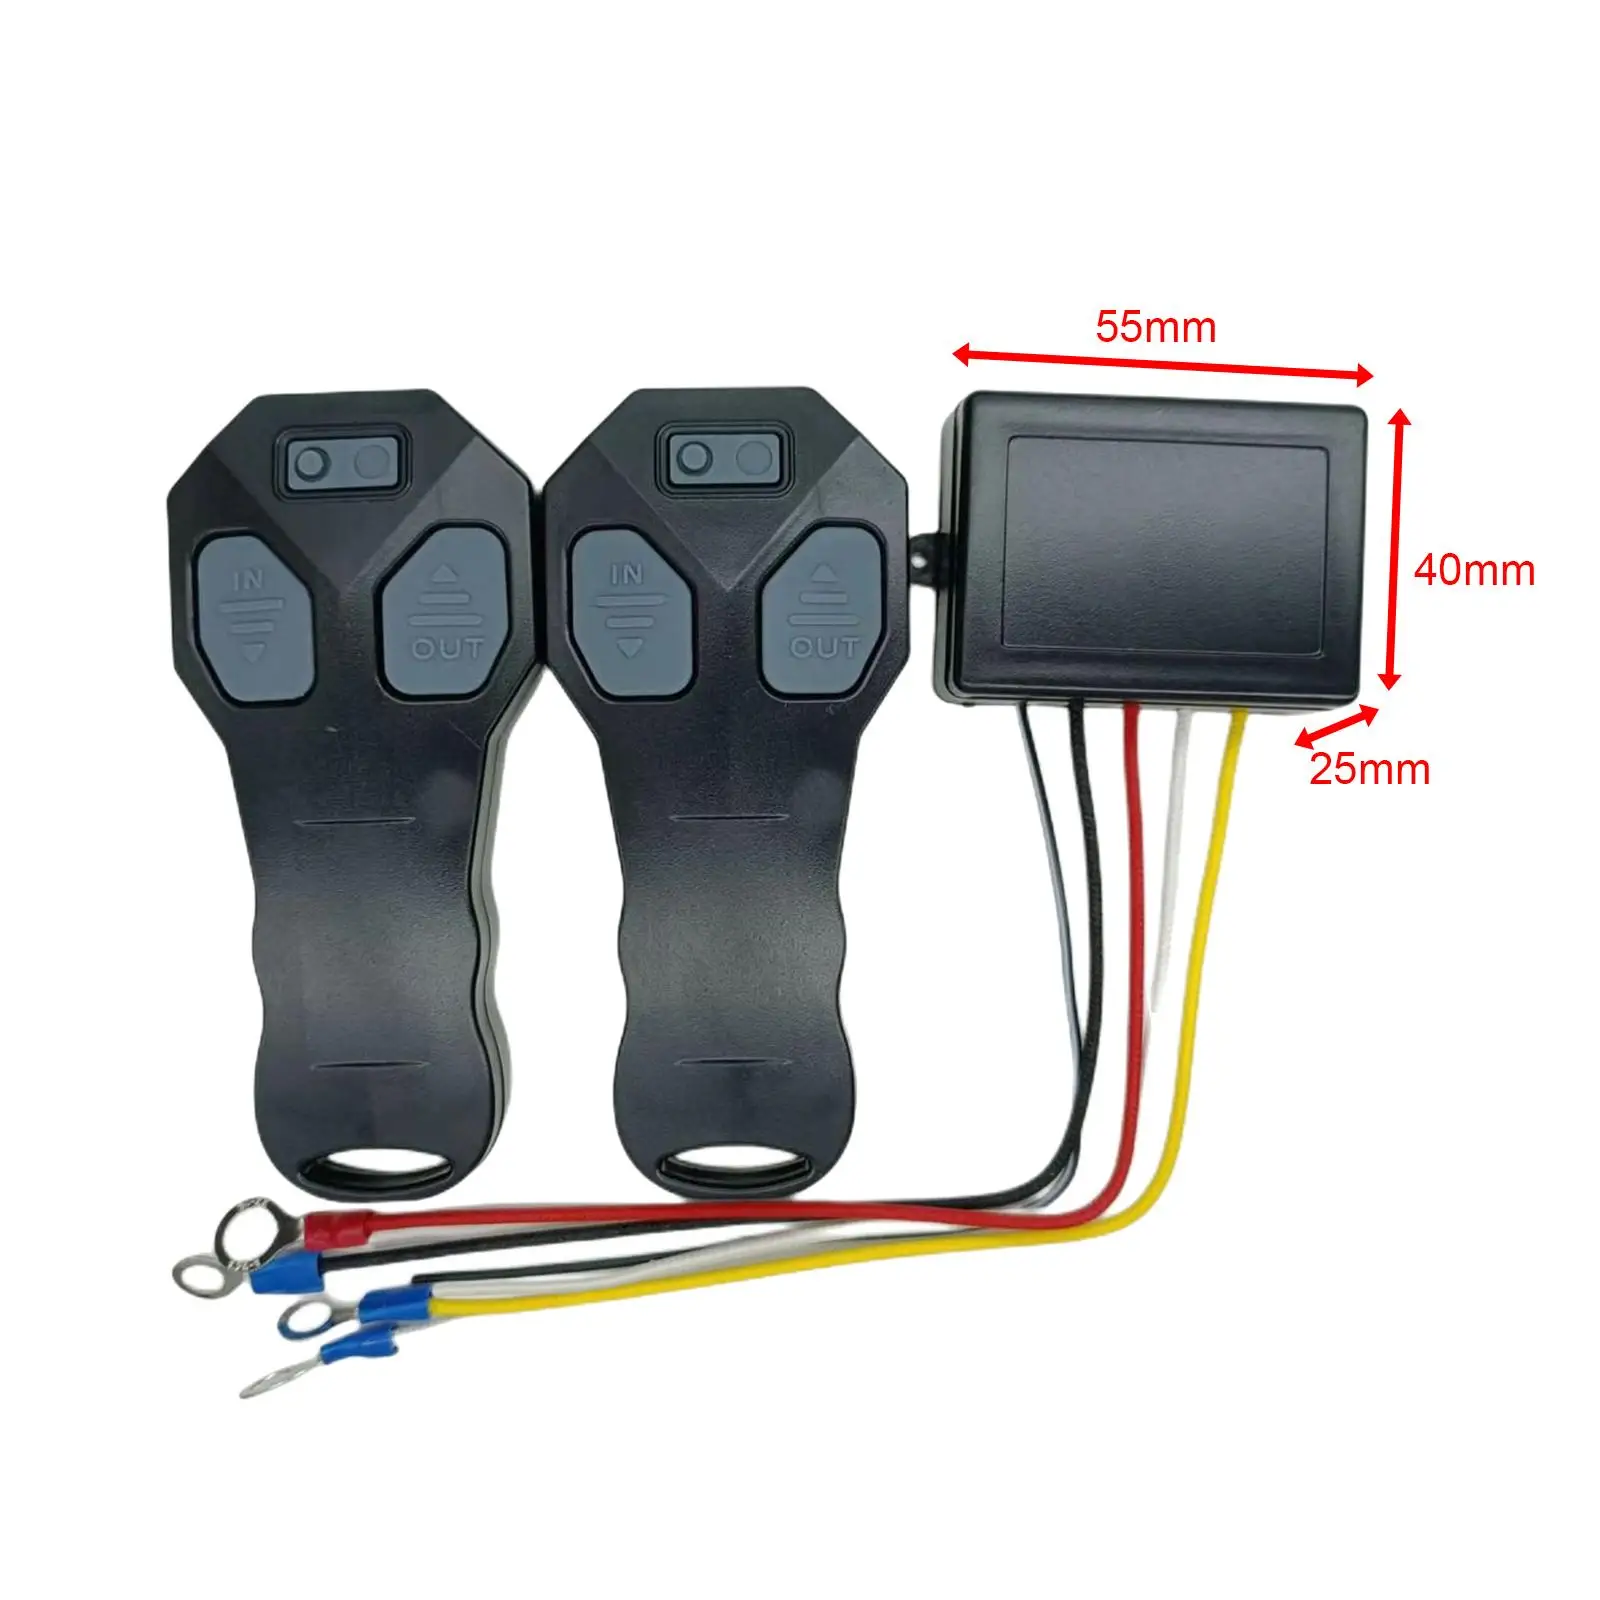 Wireless Winch Remote Control Kit Easy Installation DC12V 24V Handset Switch 2 Electric Remote Control for Truck Vehicle